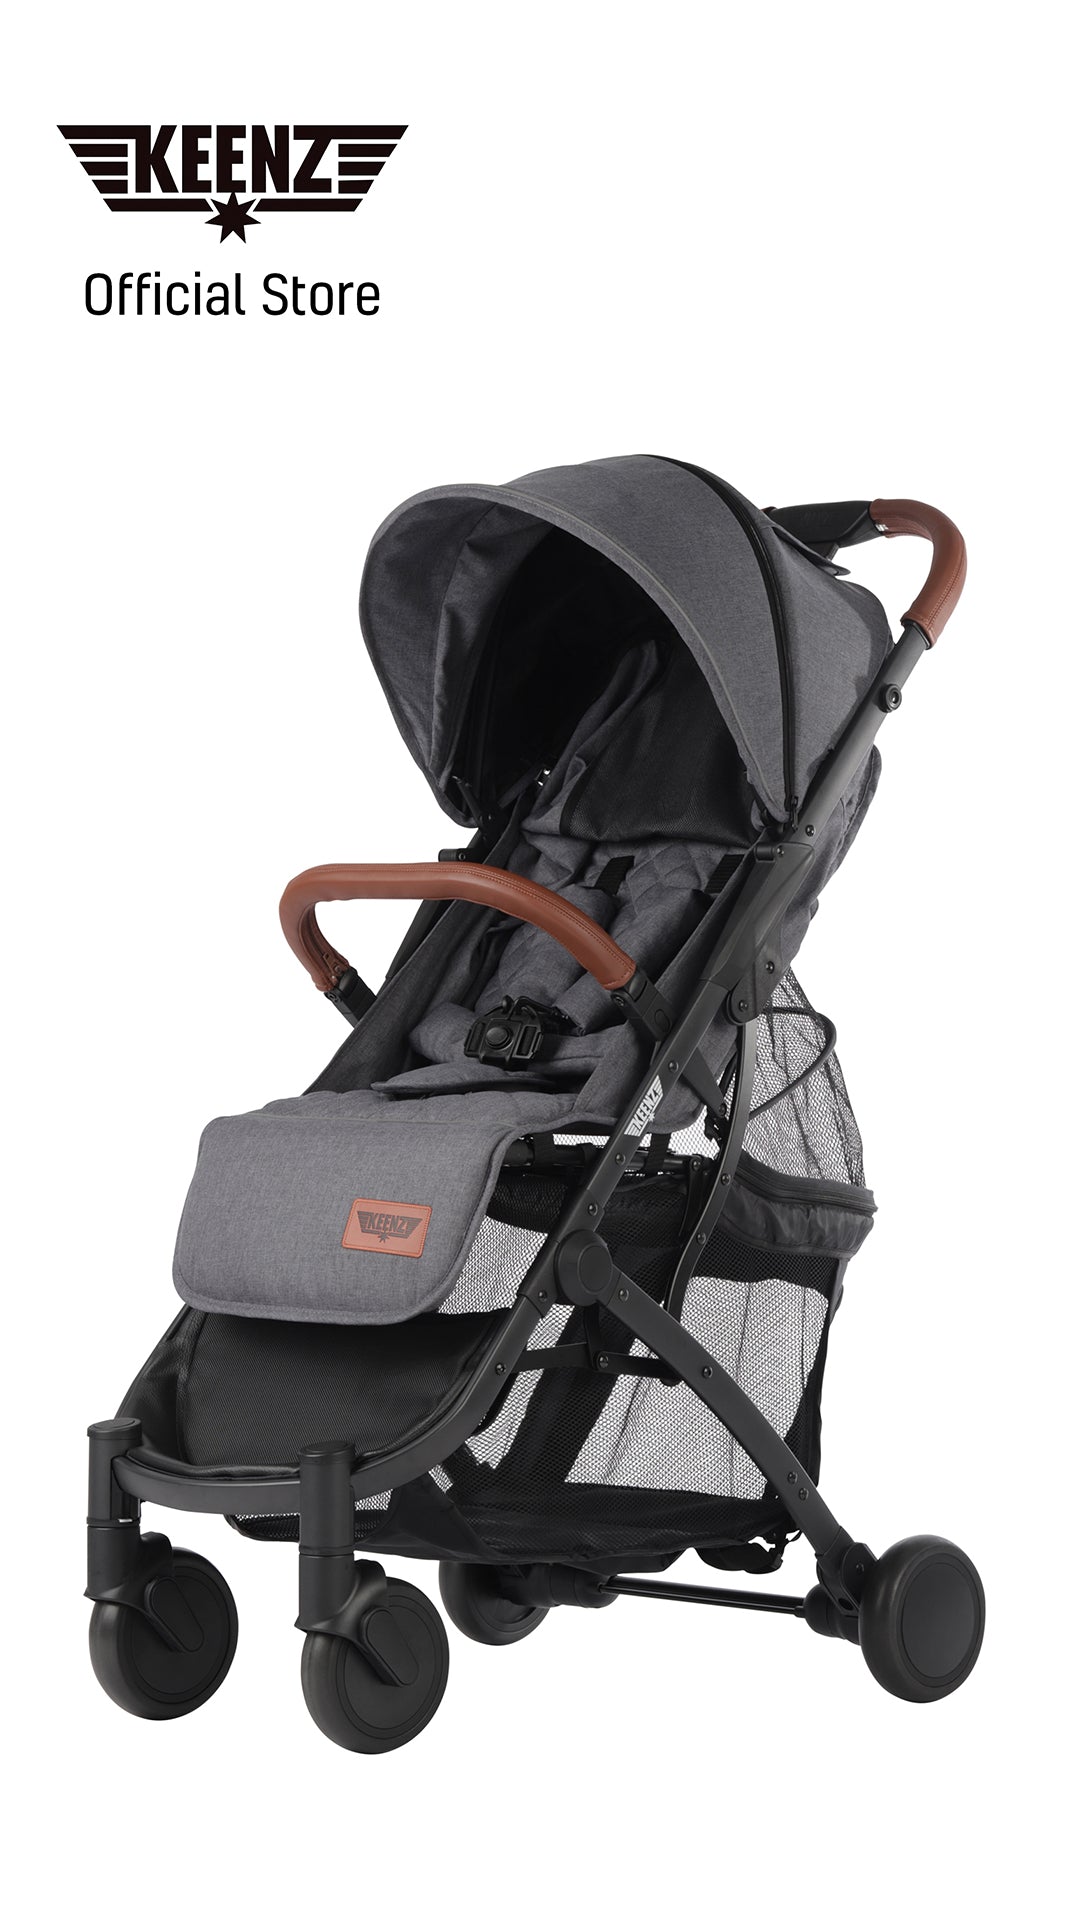 Keenz Air Plus 2.0 Stroller - Modern Gray with Brown Leatherette